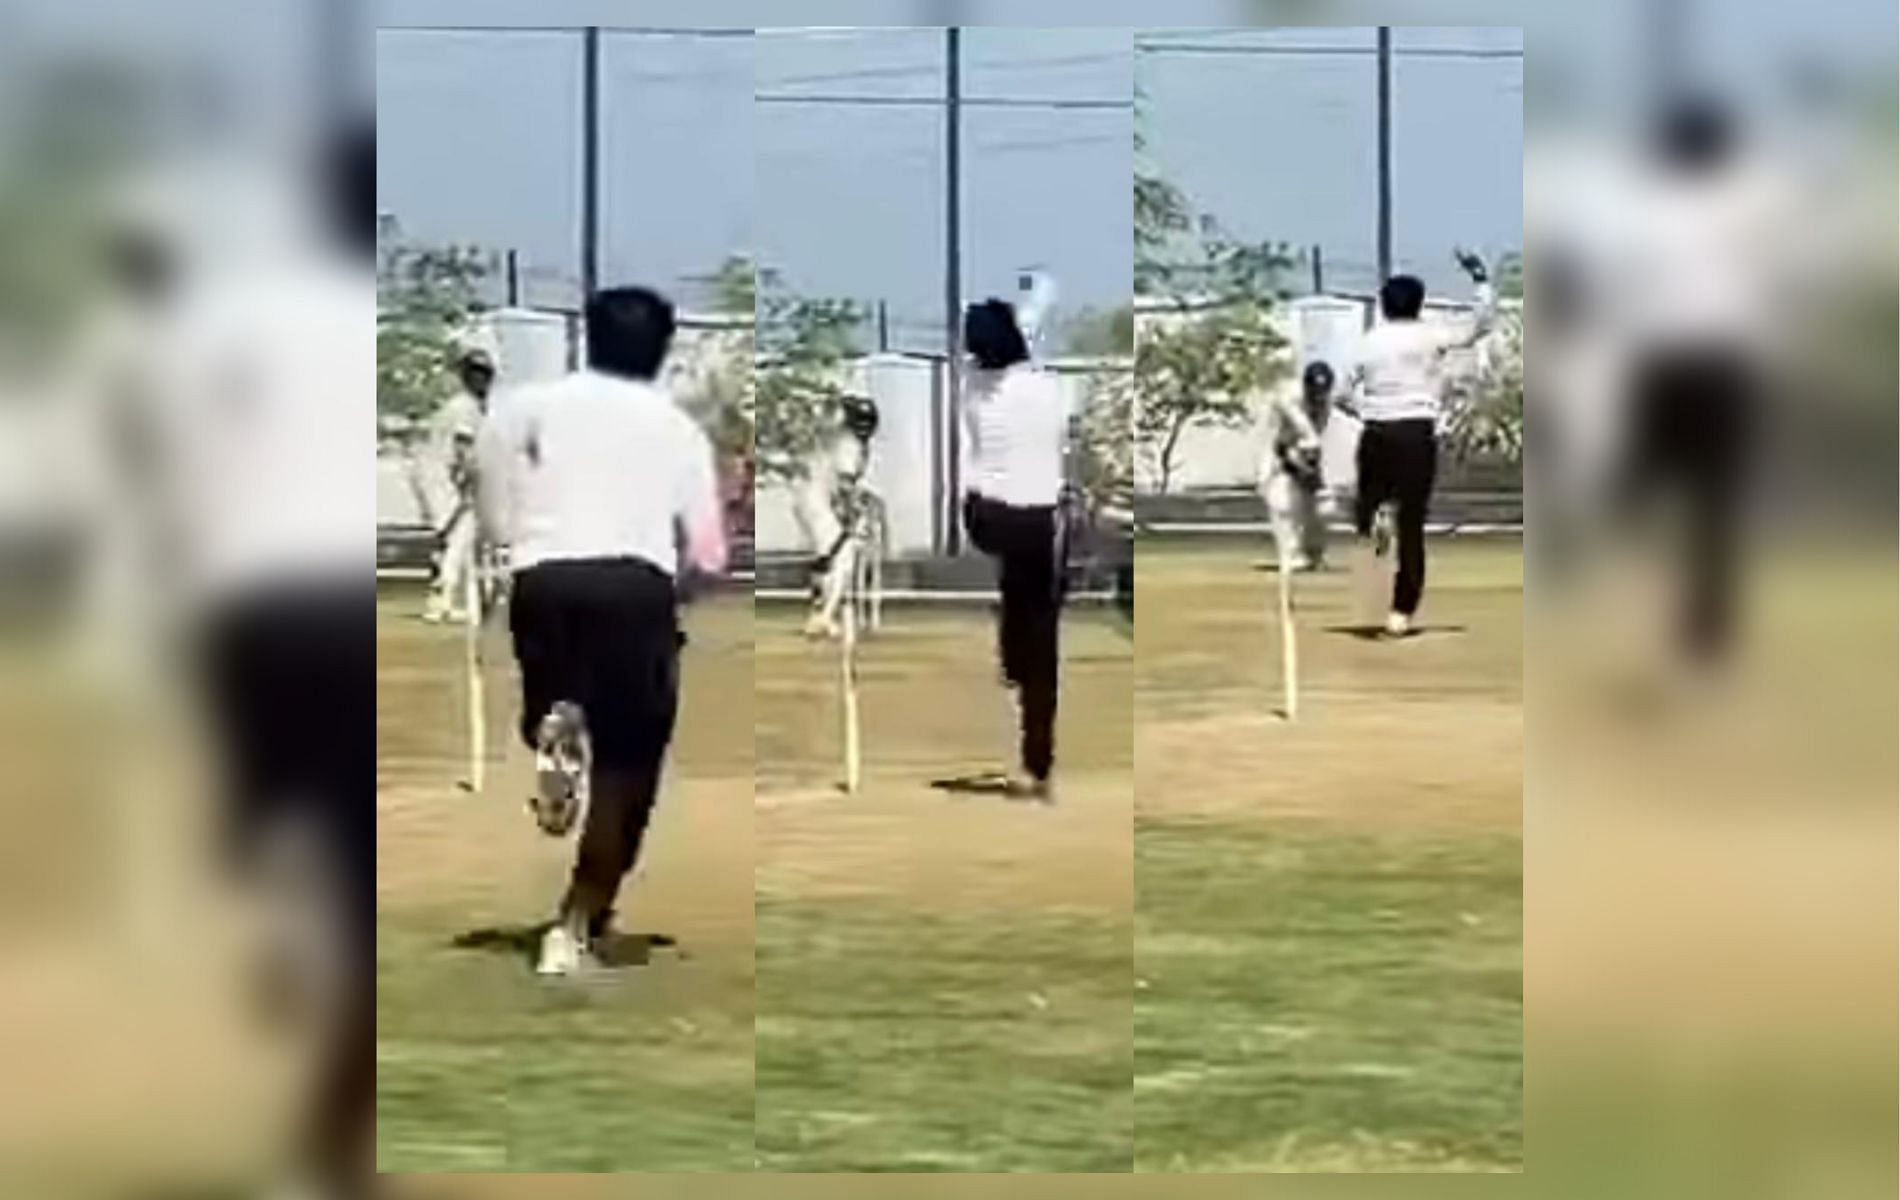 S Sreesanth bowls in the nets. (Image: Instagram)